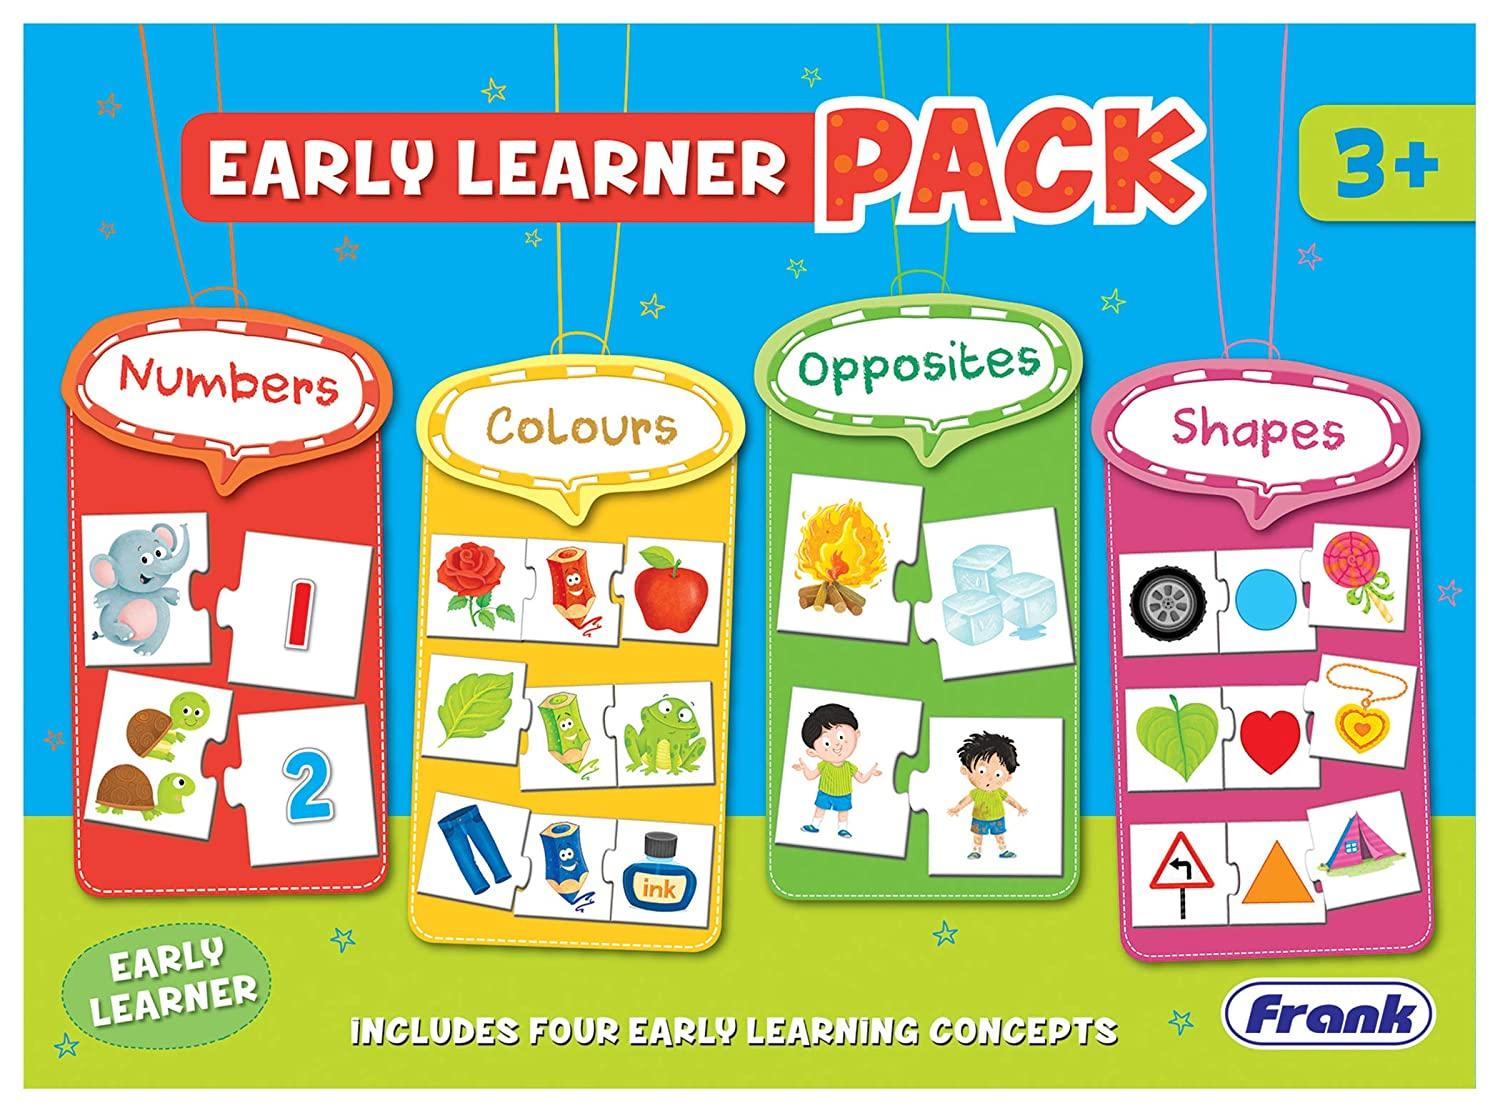 Frank Early Learner Pack ‚Äö√Ñ√¨ 88 Pieces, 20 2-Piece and 16 3-Piece Self-Correcting Puzzles for Ages 3 & Above